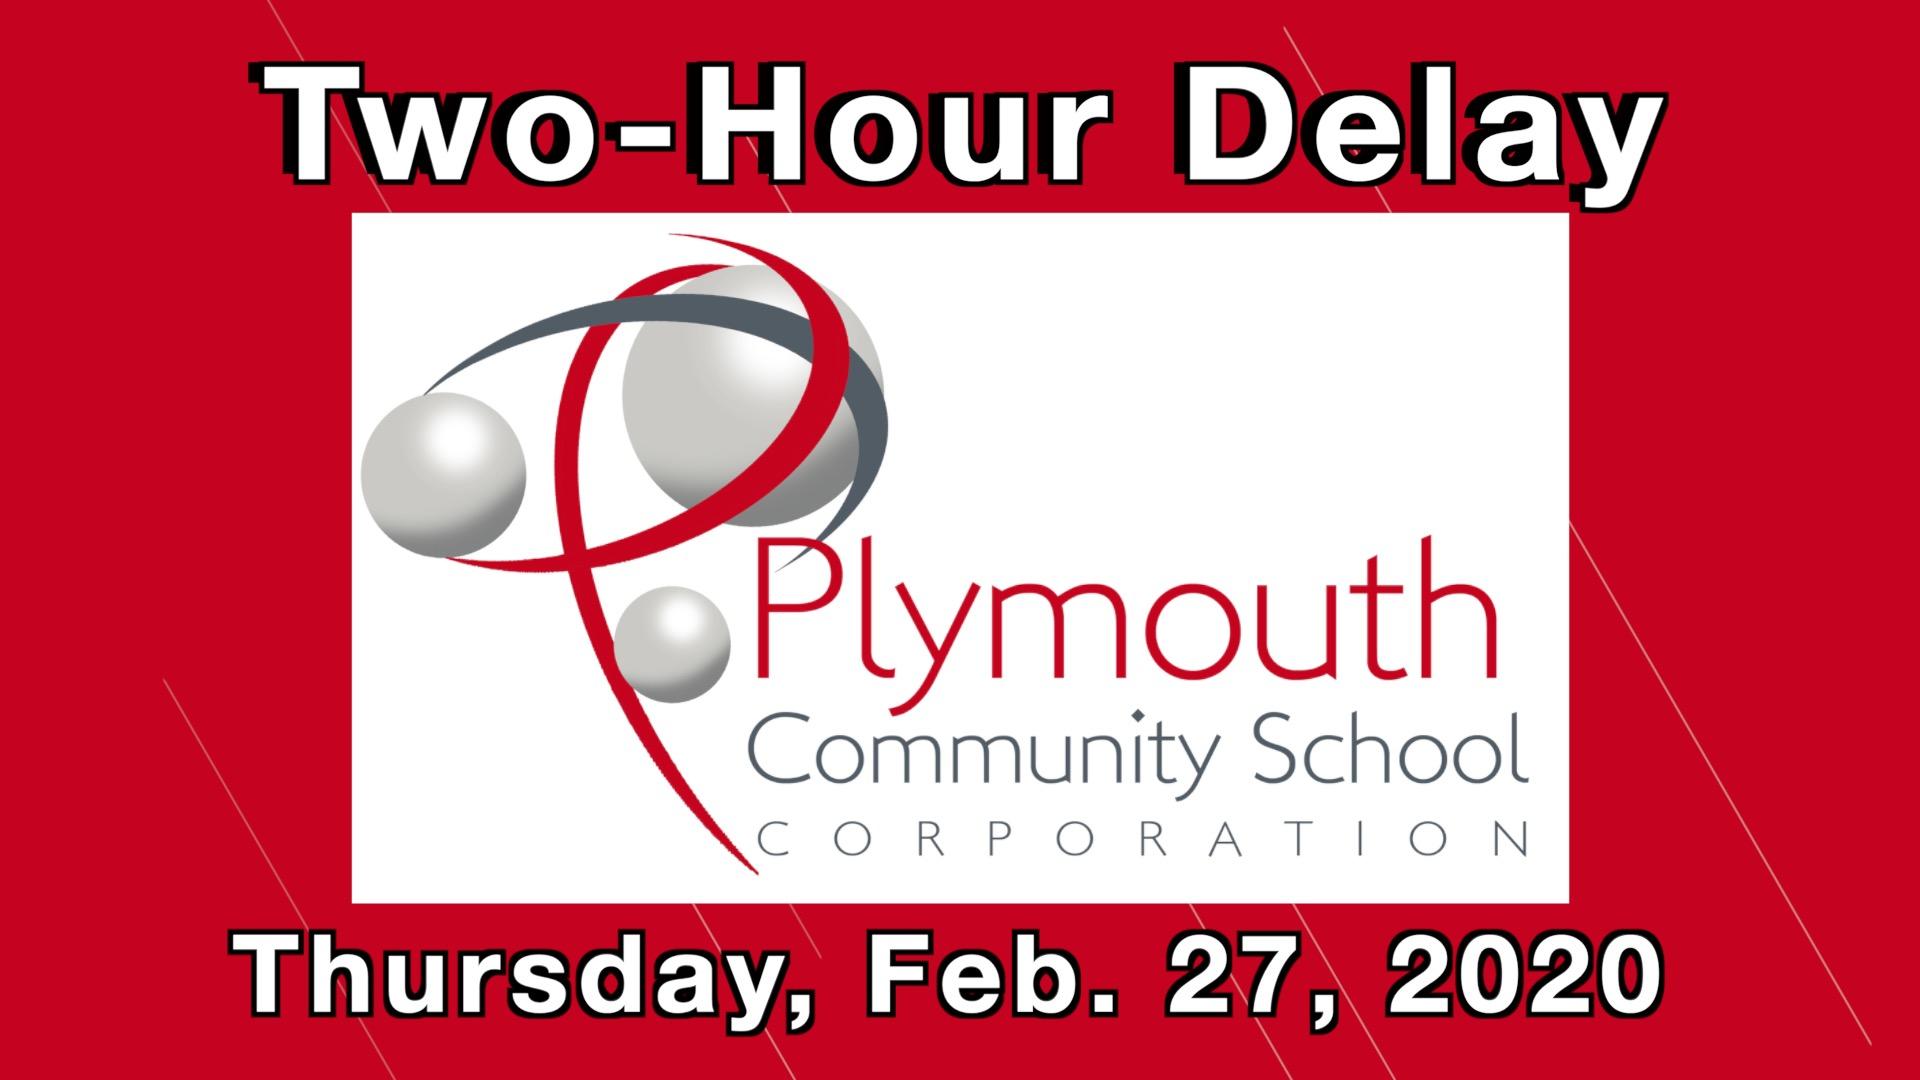 Two-Hour Delay on Thursday, February 27, 2020 with PCSC logo on red background